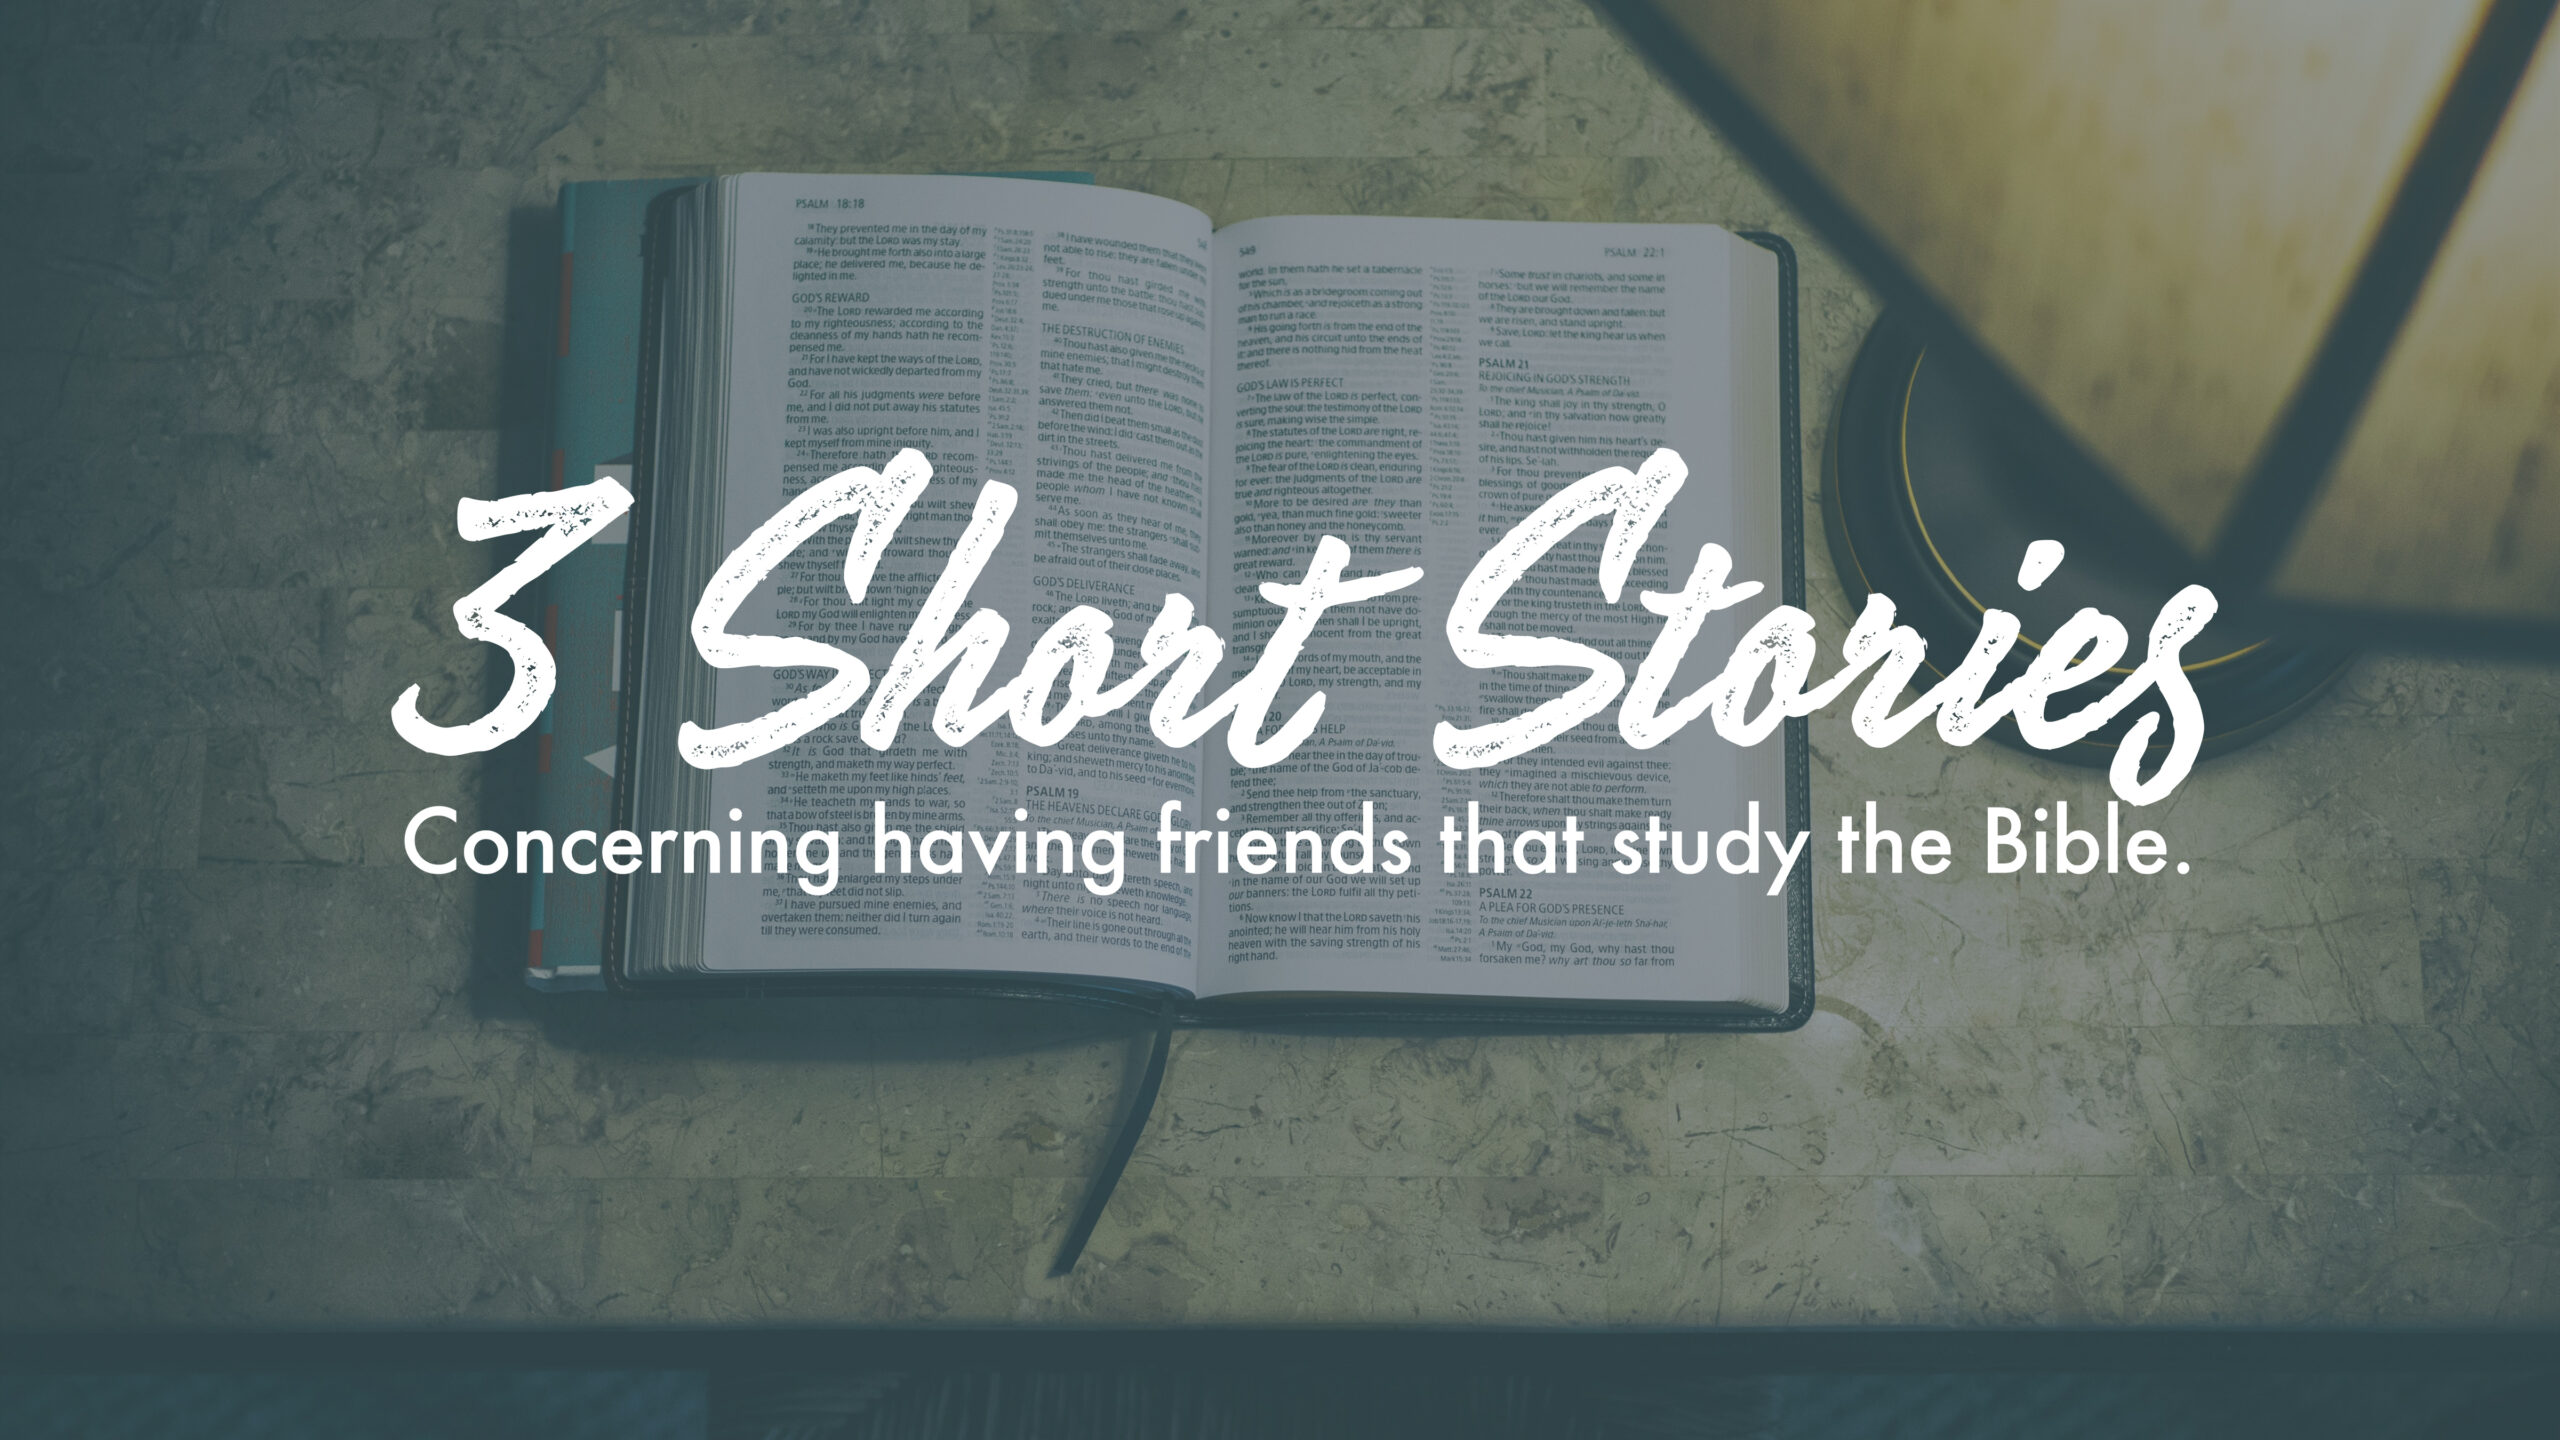 3 Short Stories: Concerning having friends that study the Bible